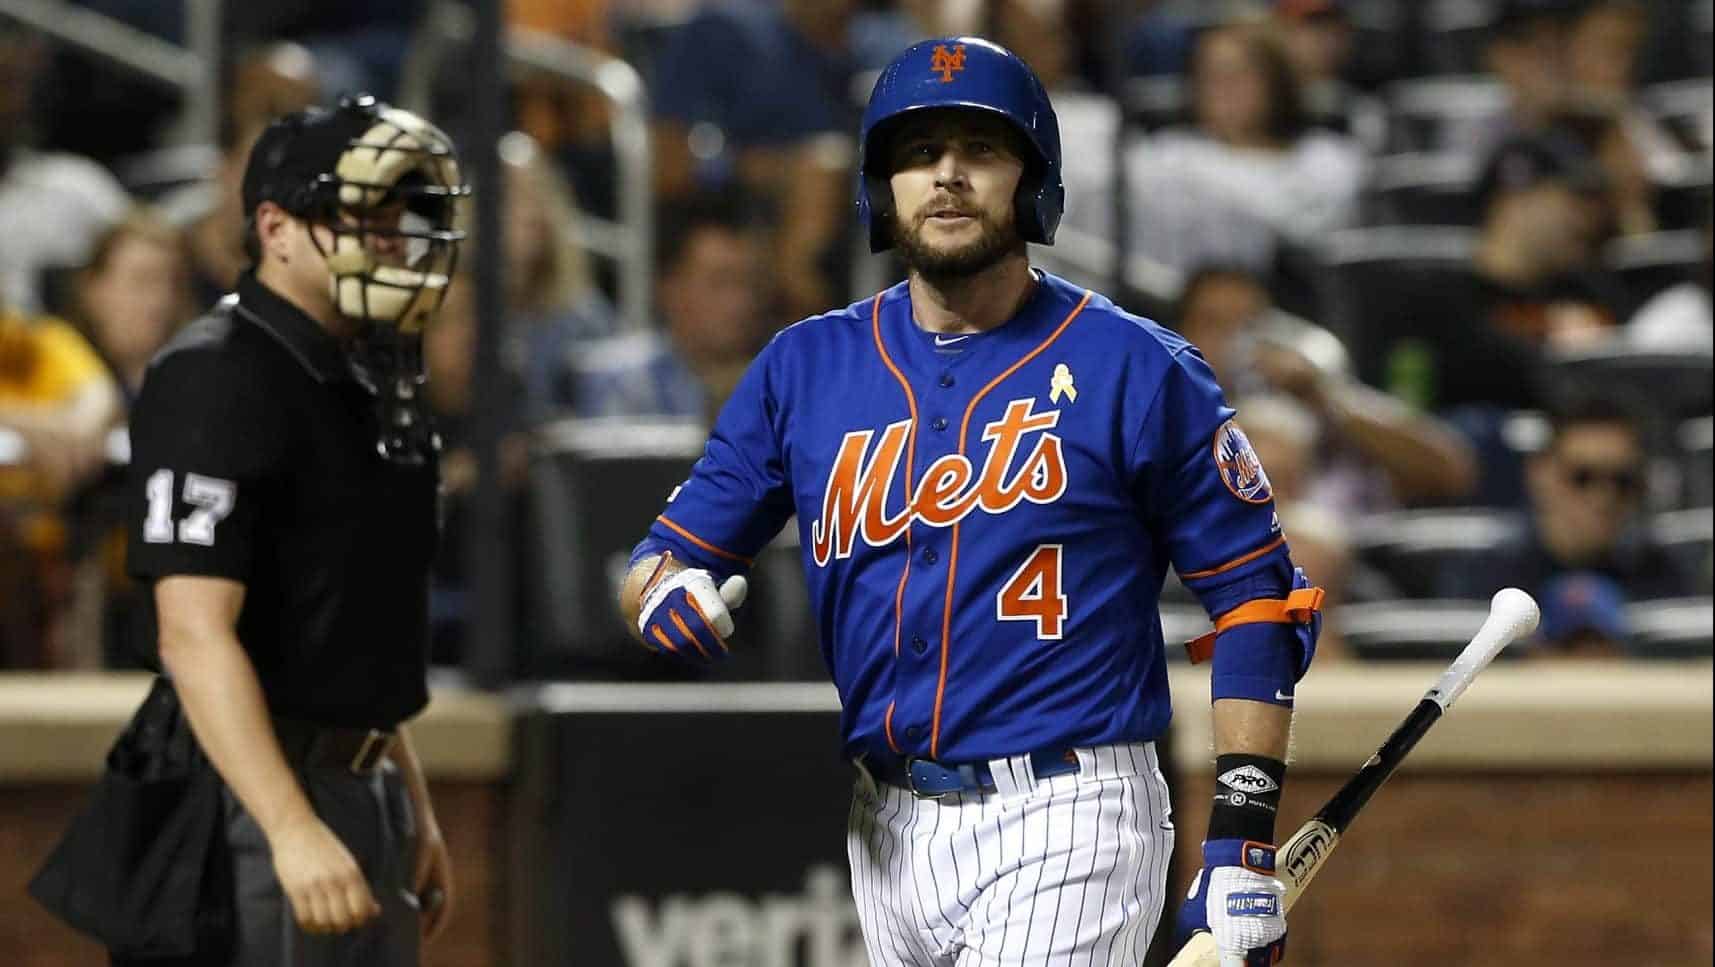 NEW YORK, NEW YORK - SEPTEMBER 07: Pinch hitter Jed Lowrie #4 of the New York Mets walks back to the dugout after striking out in the fourth inning against the Philadelphia Phillies at Citi Field on September 07, 2019 in New York City.